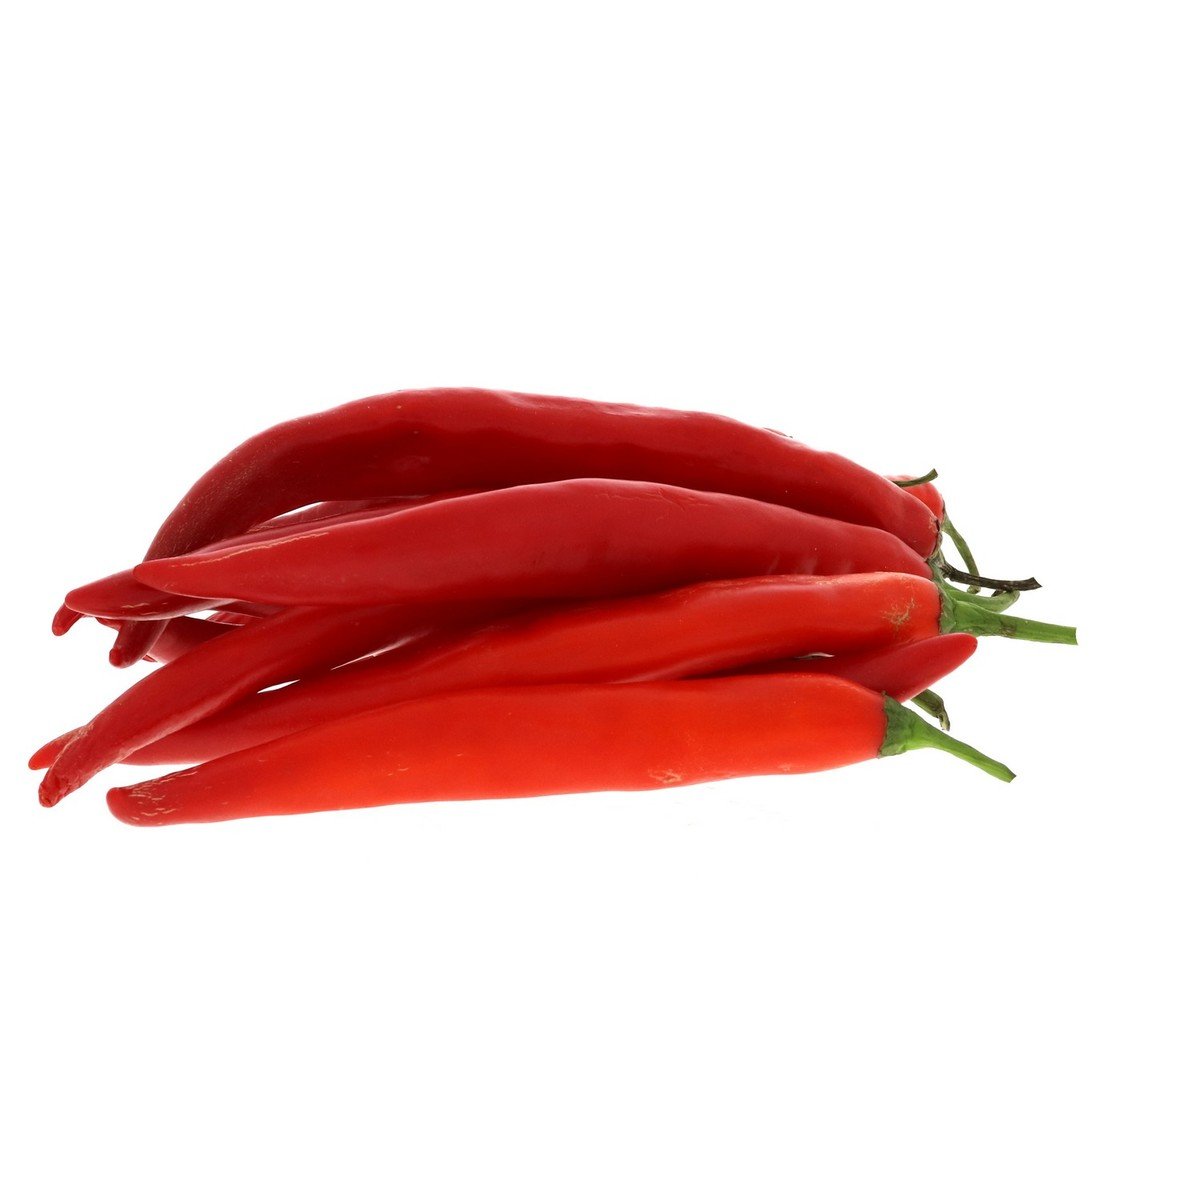 Red Long Chili Morocco 150 g